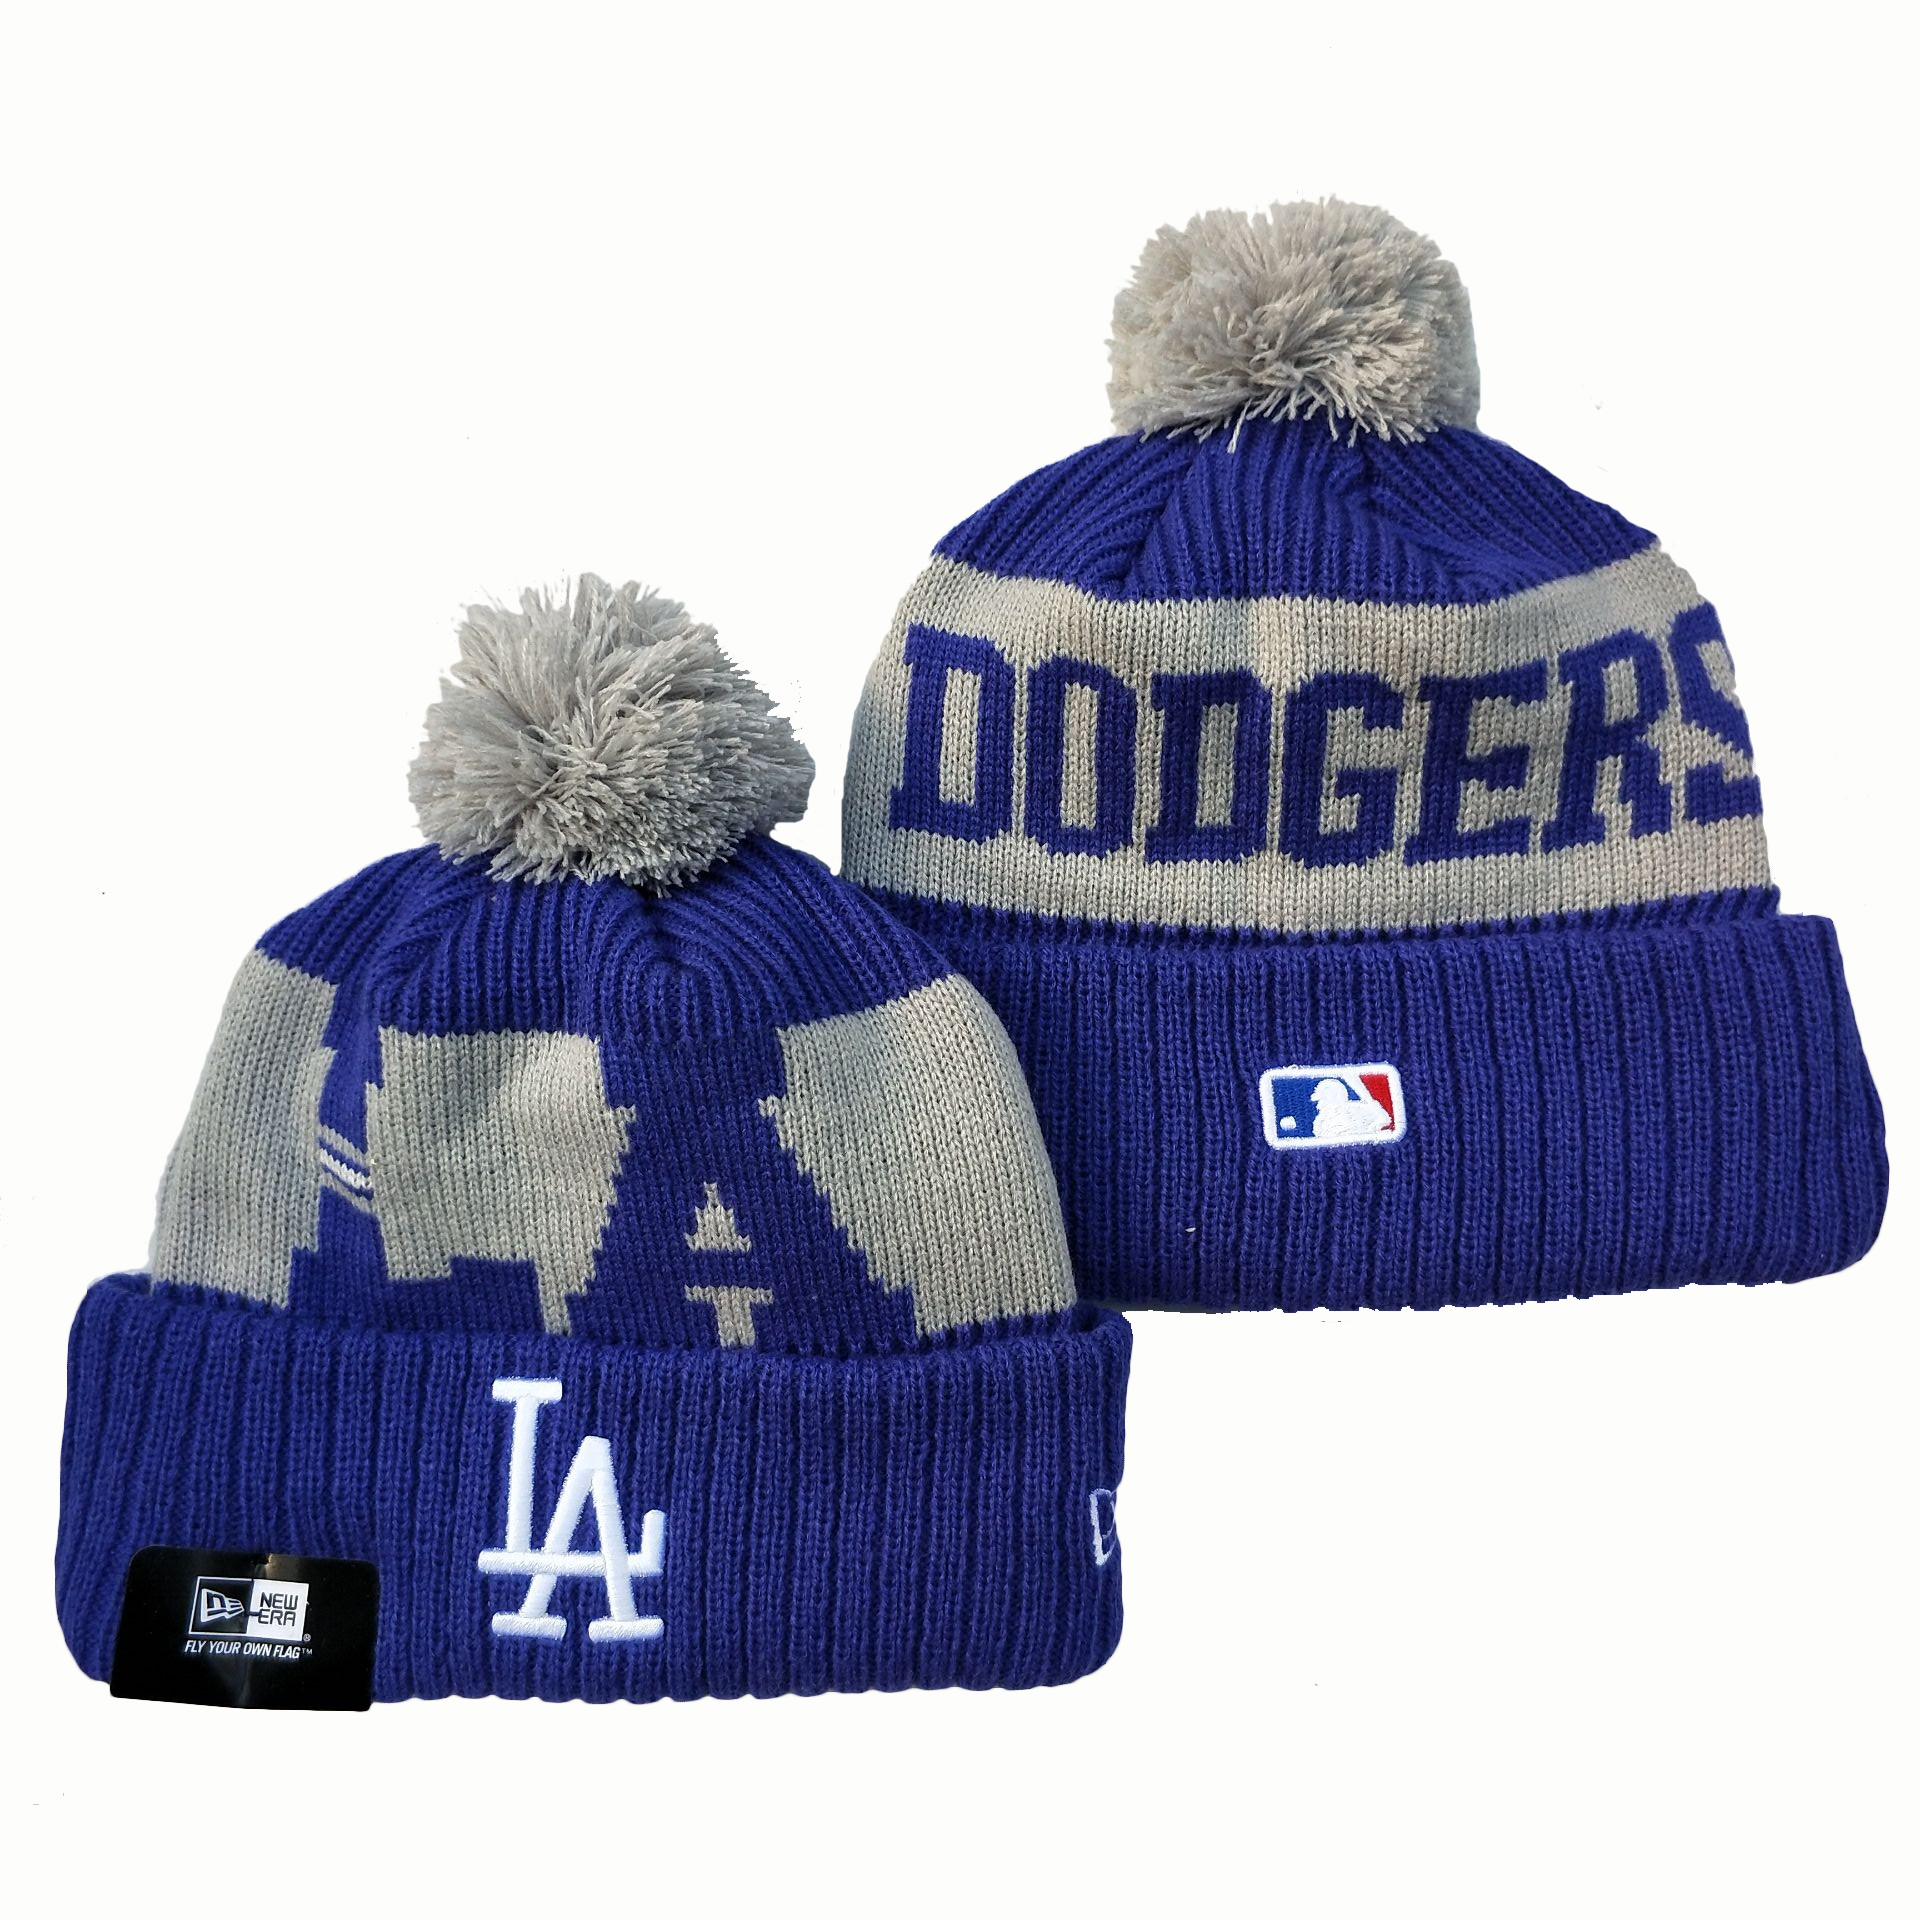 MLB Los Angeles Dodgers Beanies Knit Hats-YD125